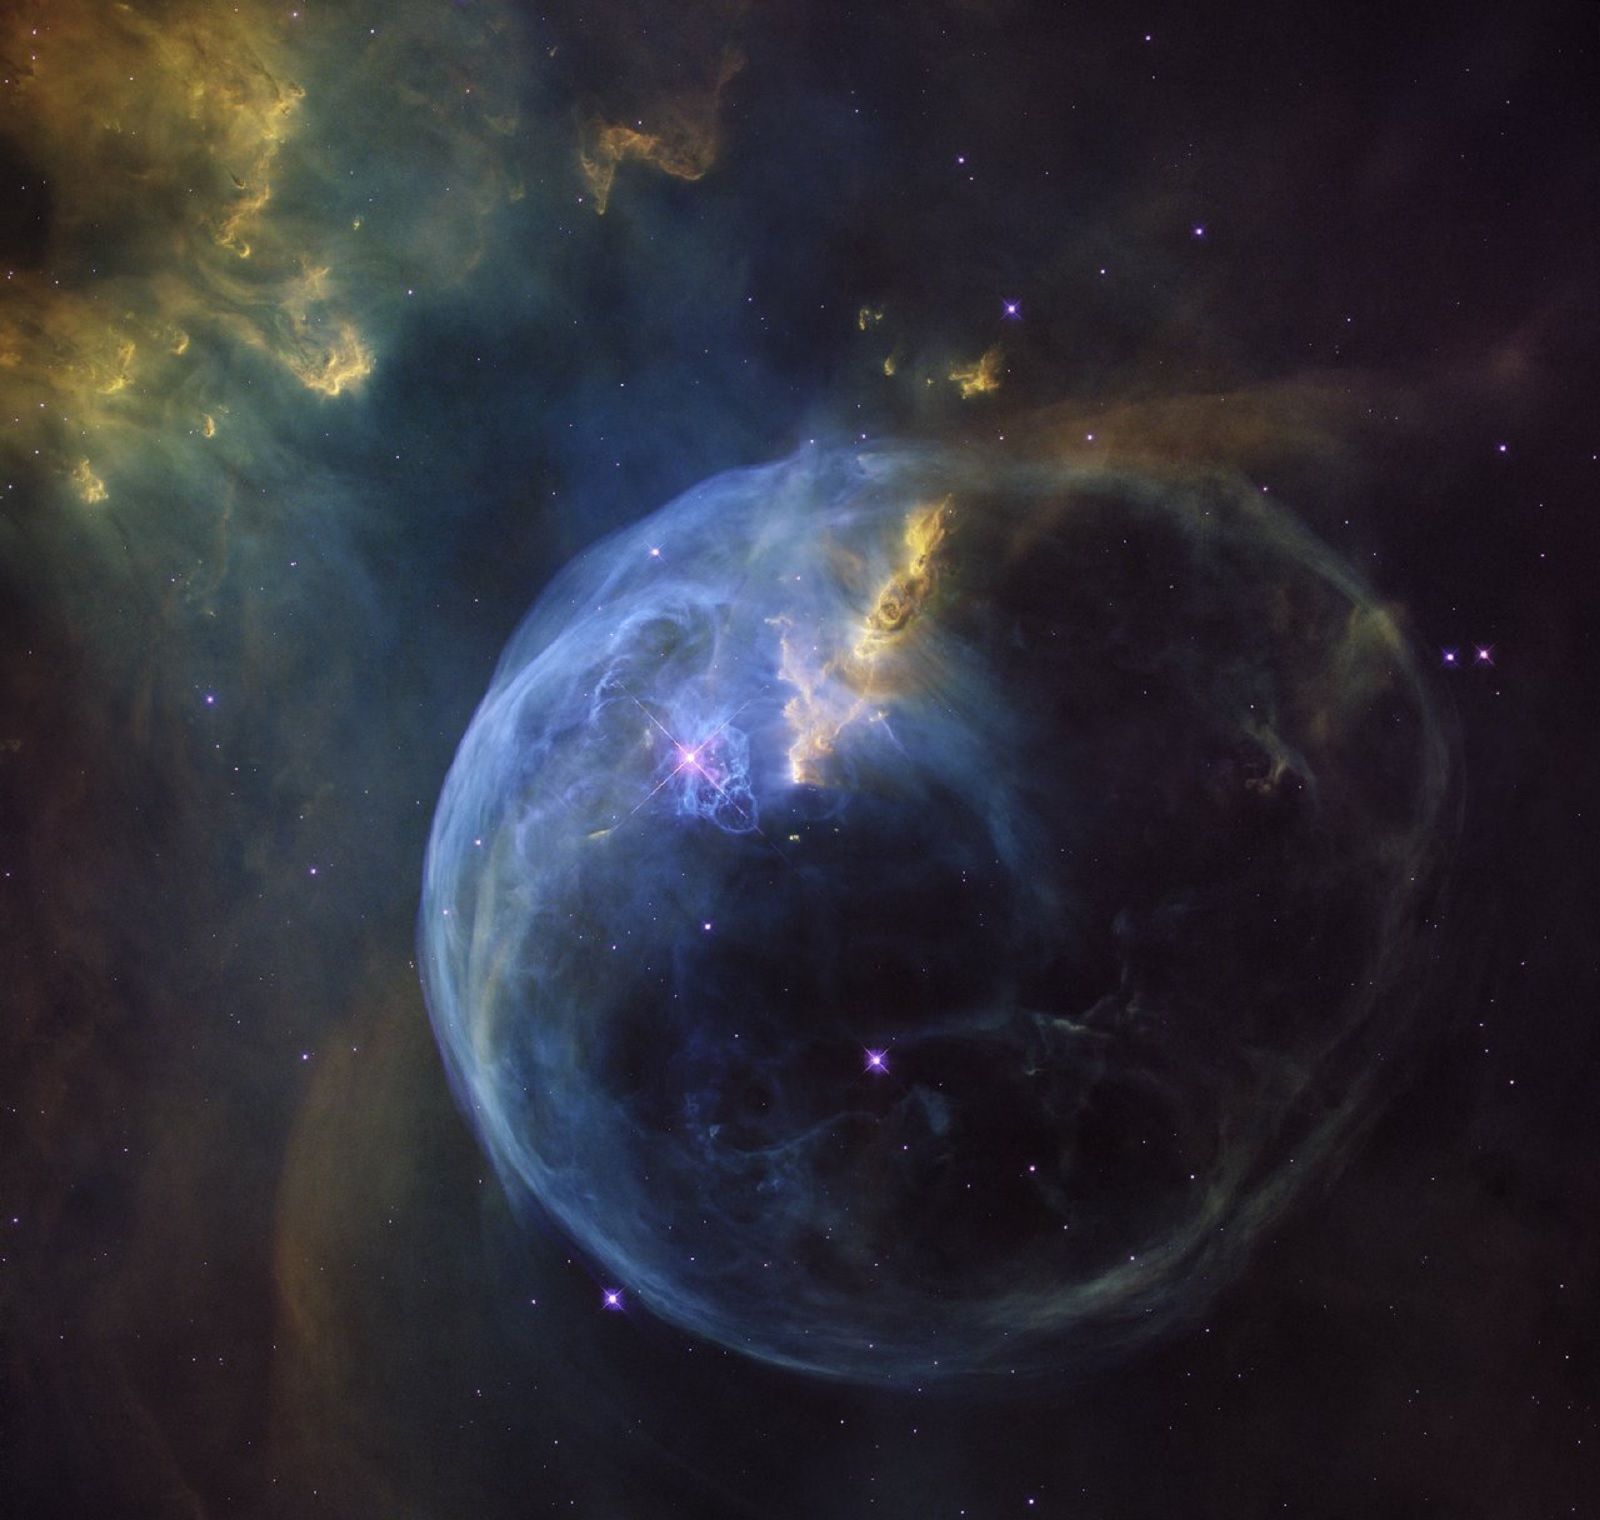 astounding images from the depths of the universe courtesy of the hubble space telescope photo 31